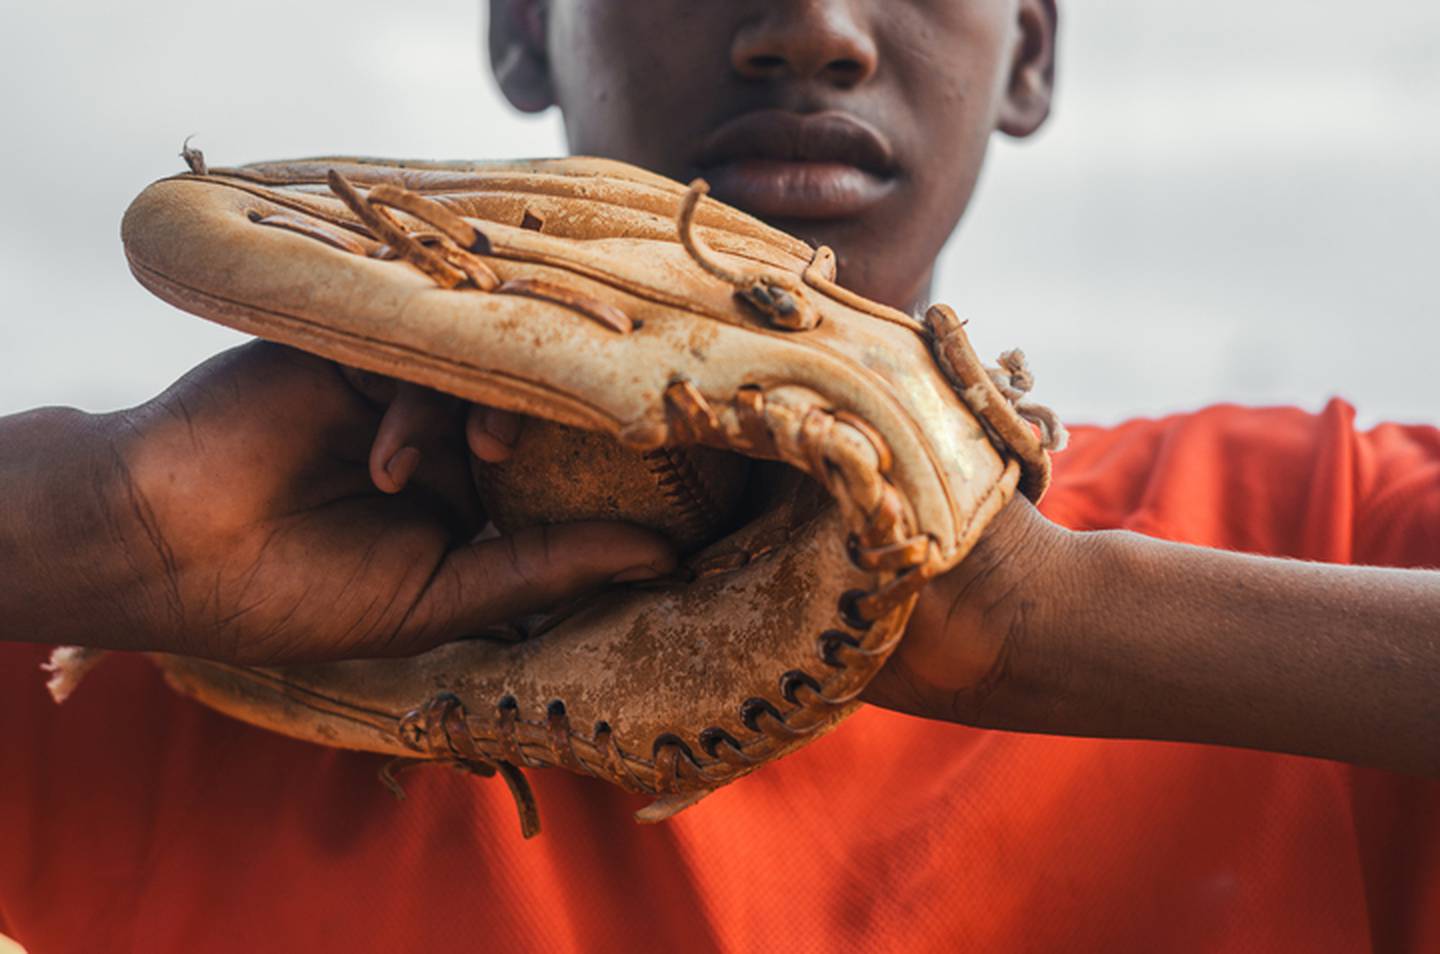 From January 15 to December 15, 2021, 420 baseball players from the Dominican Republic were signed by MLB teams, for fees totaling $83.5 million